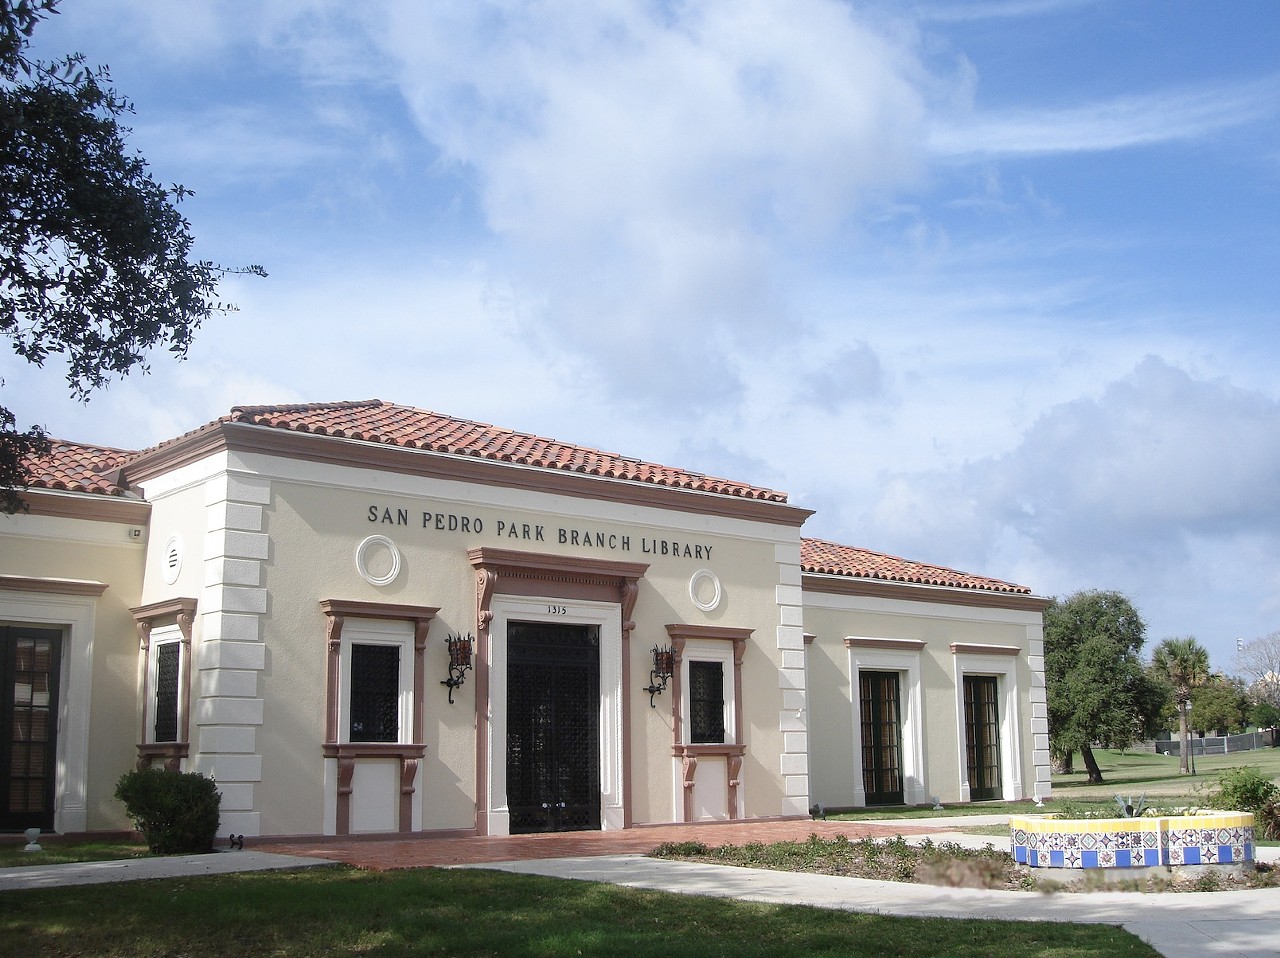 Oldest Library: San Pedro Park Branch Library
1315 San Pedro Ave.
As the name suggests, this historic library is located in San Pedro Springs Park. Opened in 1930, it's the first branch library built in San Antonio and the only one built in a public park. The library was renovated in 2007, restoring it to near its original condition.